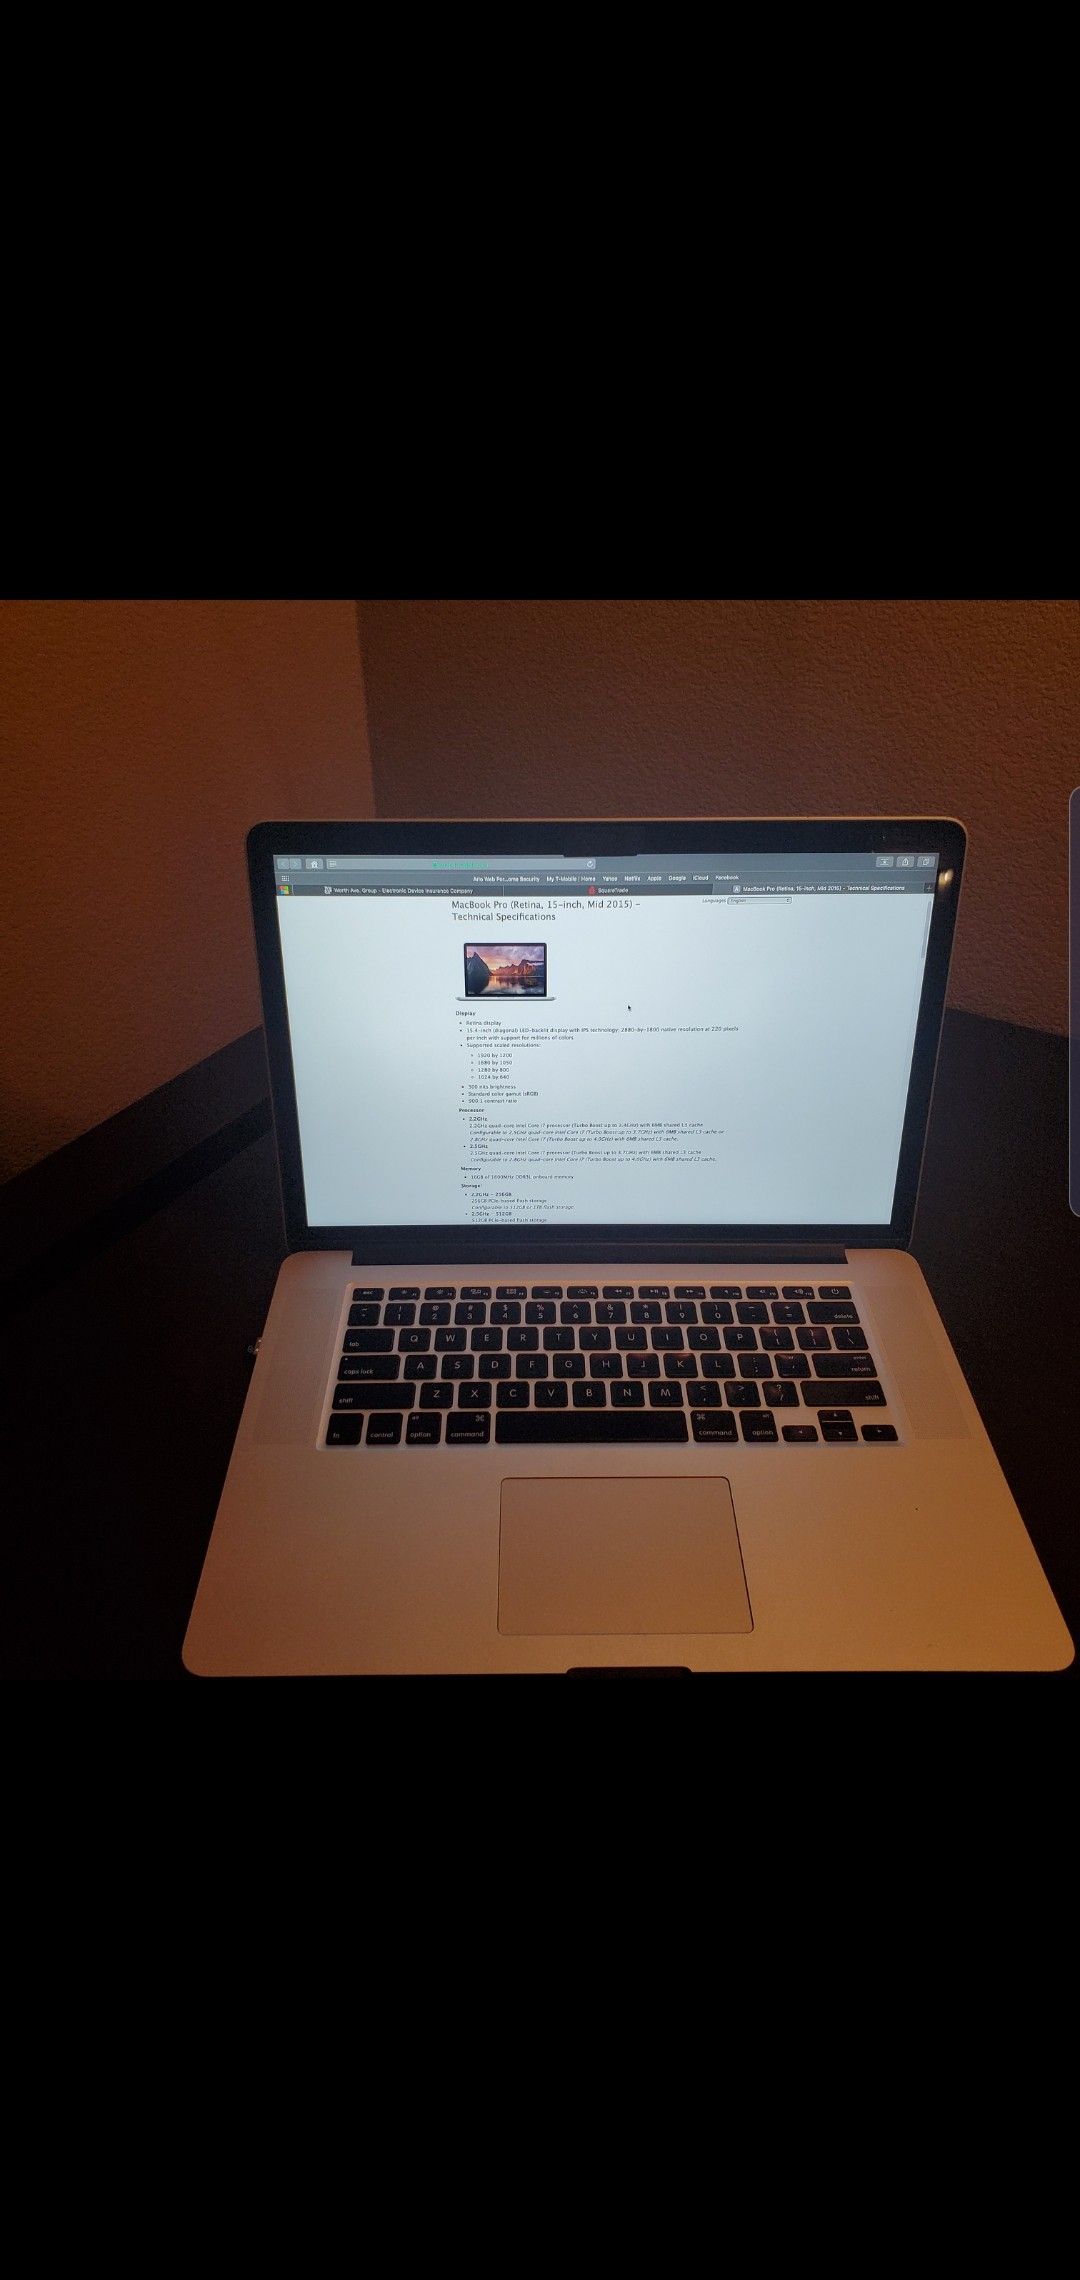 Maxed out Macbook Pro (i7, Retina, 15-inch, Mid 2015)